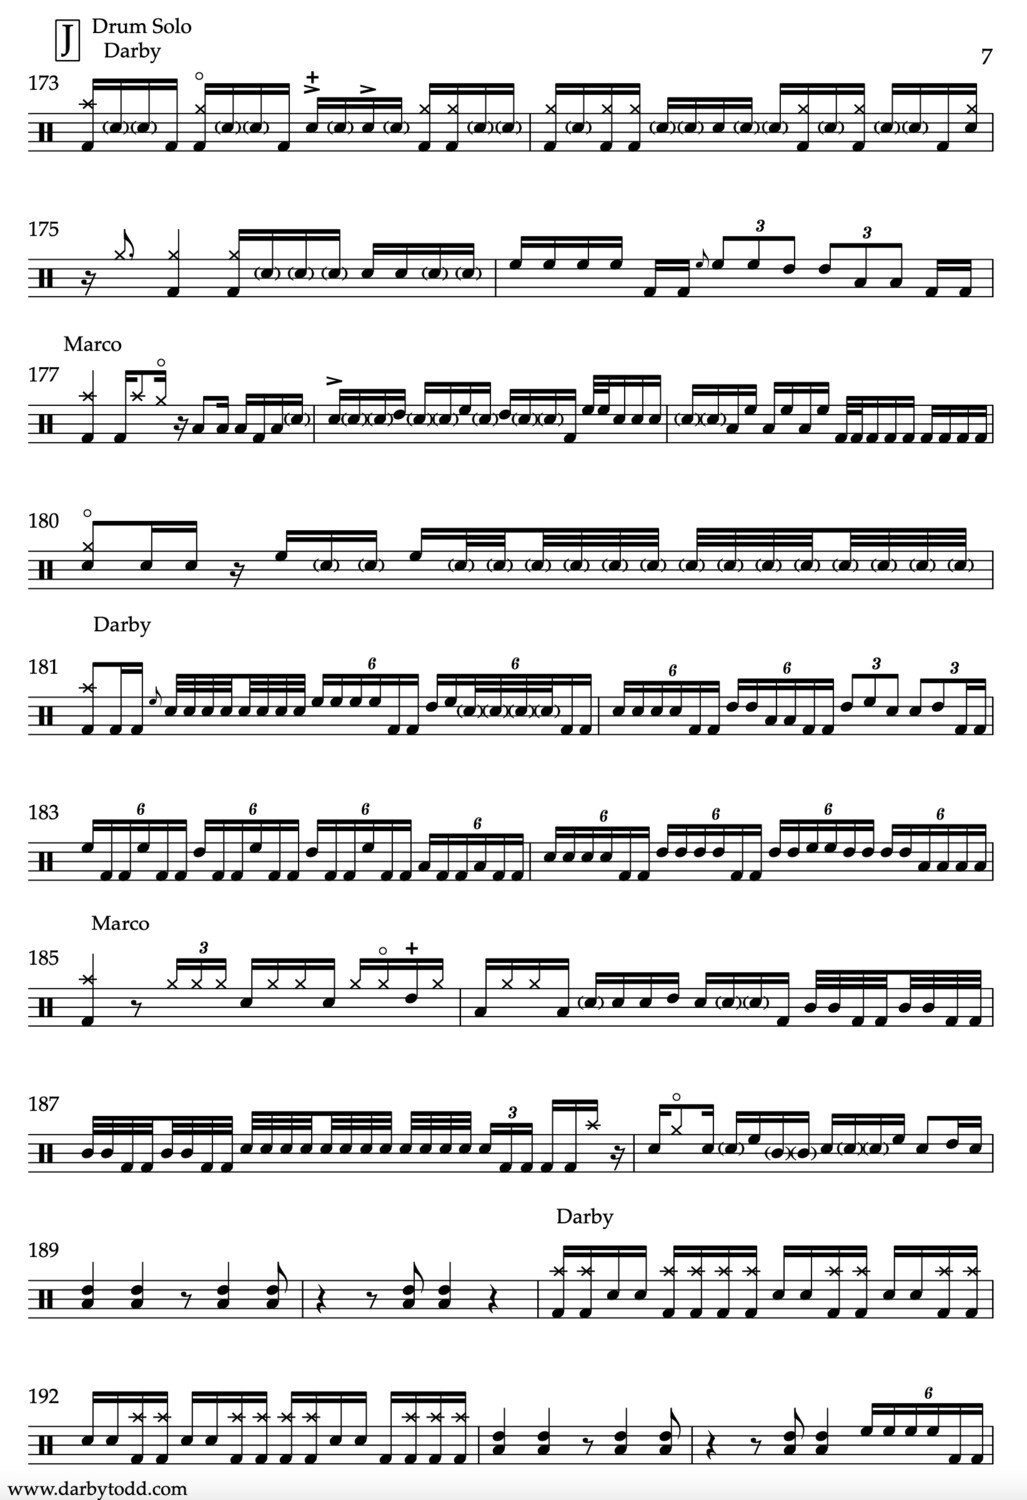 All three songs playalong/transcription bundle download